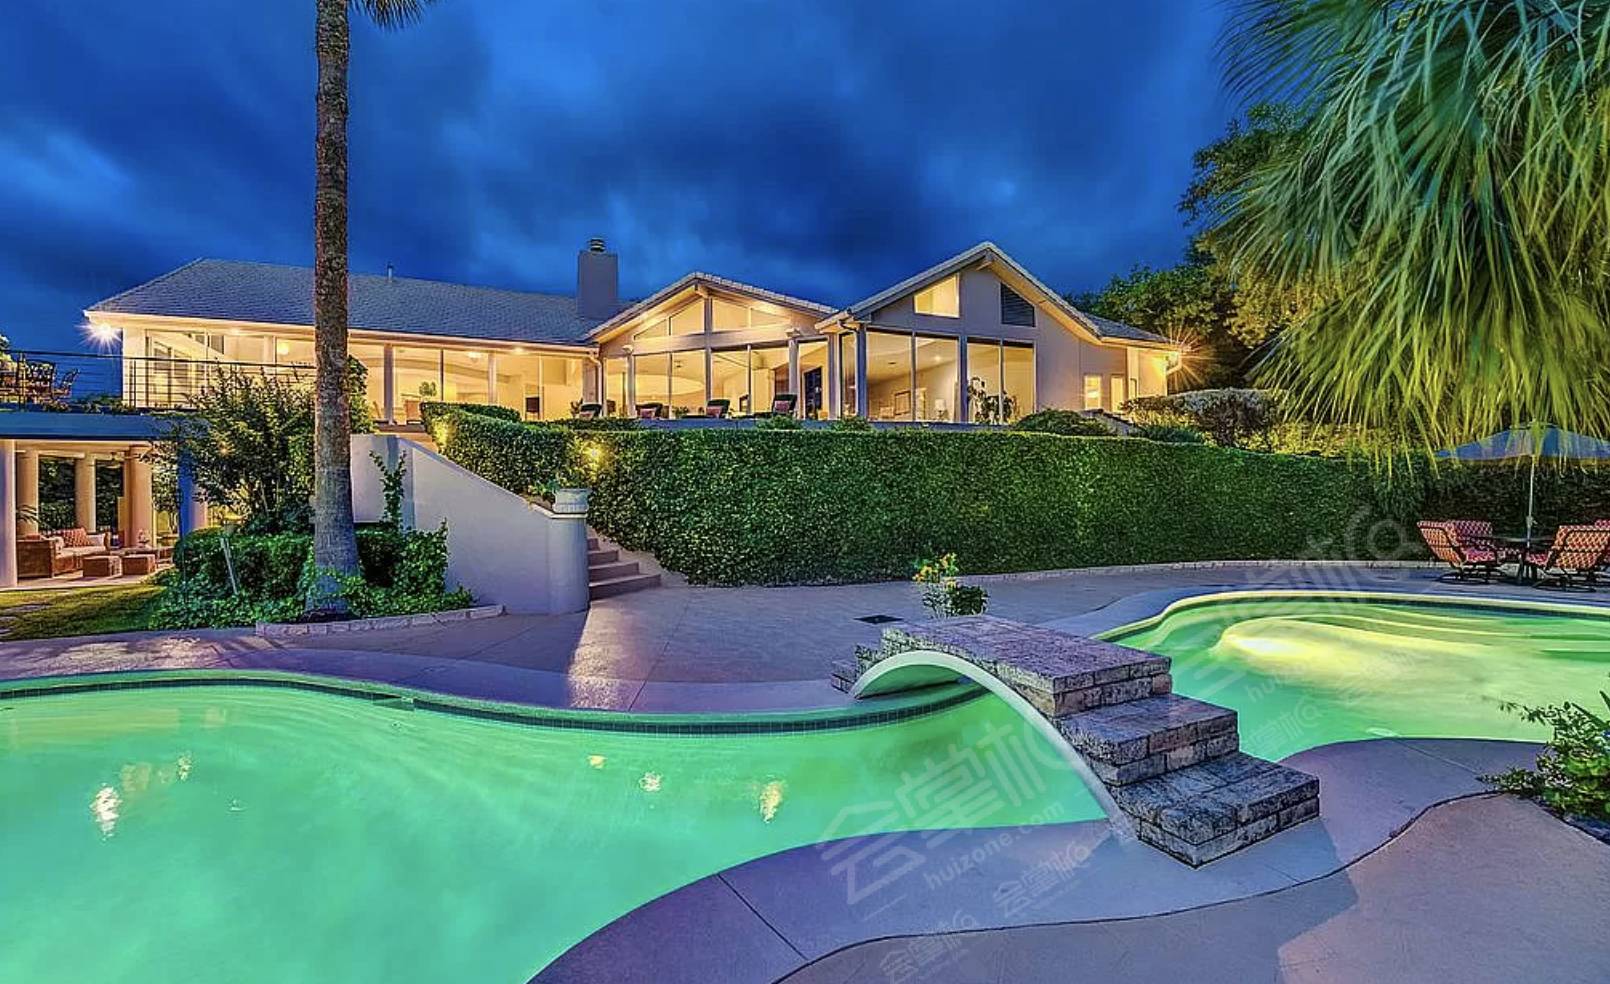 Elevated Mansion with Backyard Event Space: Waterfall, Pickleball, Pool & Outdoor Kitchen